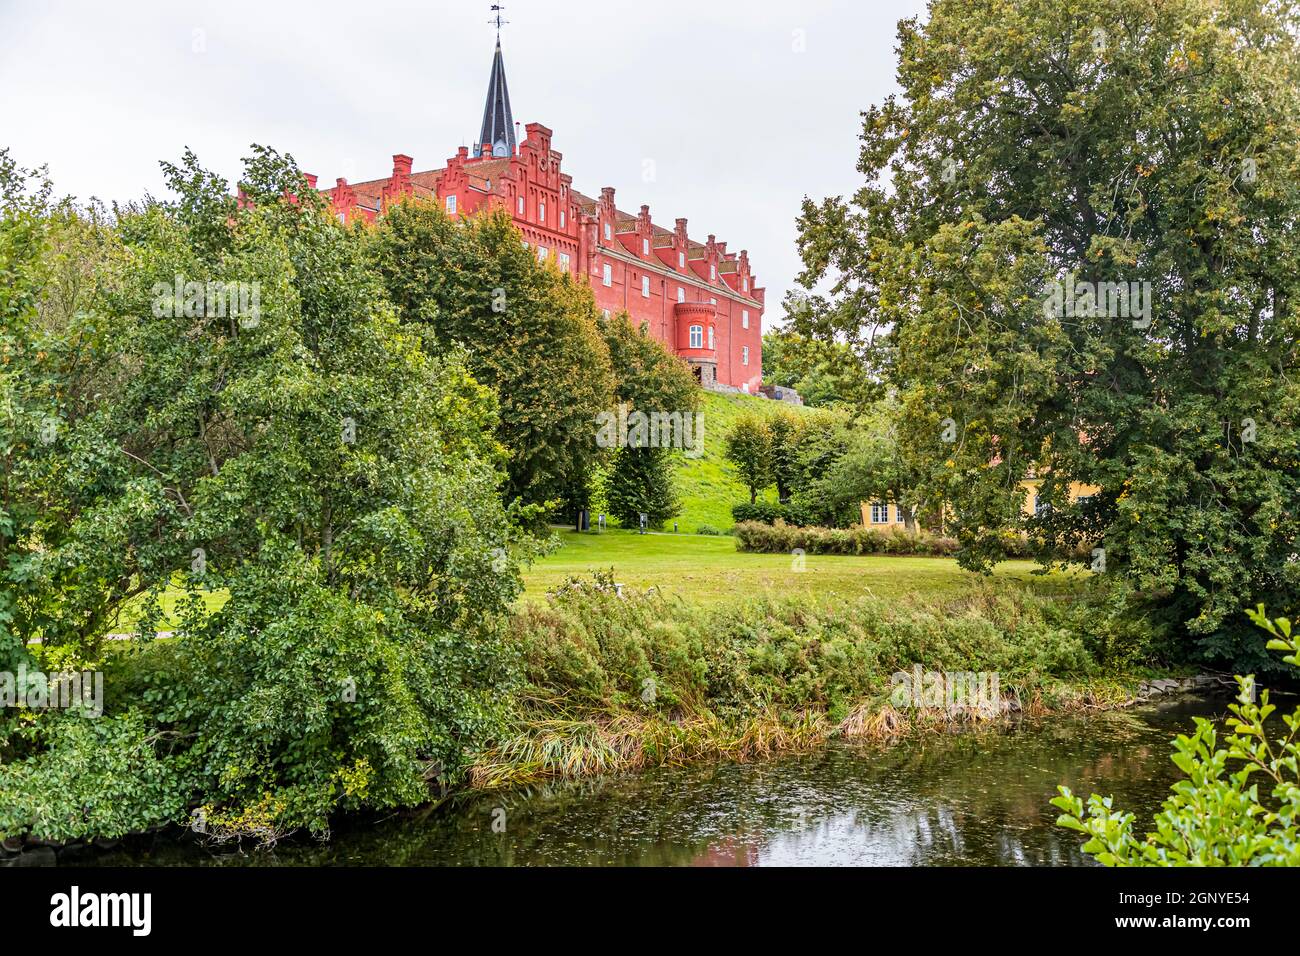 Tranekær Castle is glowing red in the park. The castle has existed on this site since the 13th century and was used as an official residence by the officials of the Danish king on the island of Langeland, Denmark Stock Photo